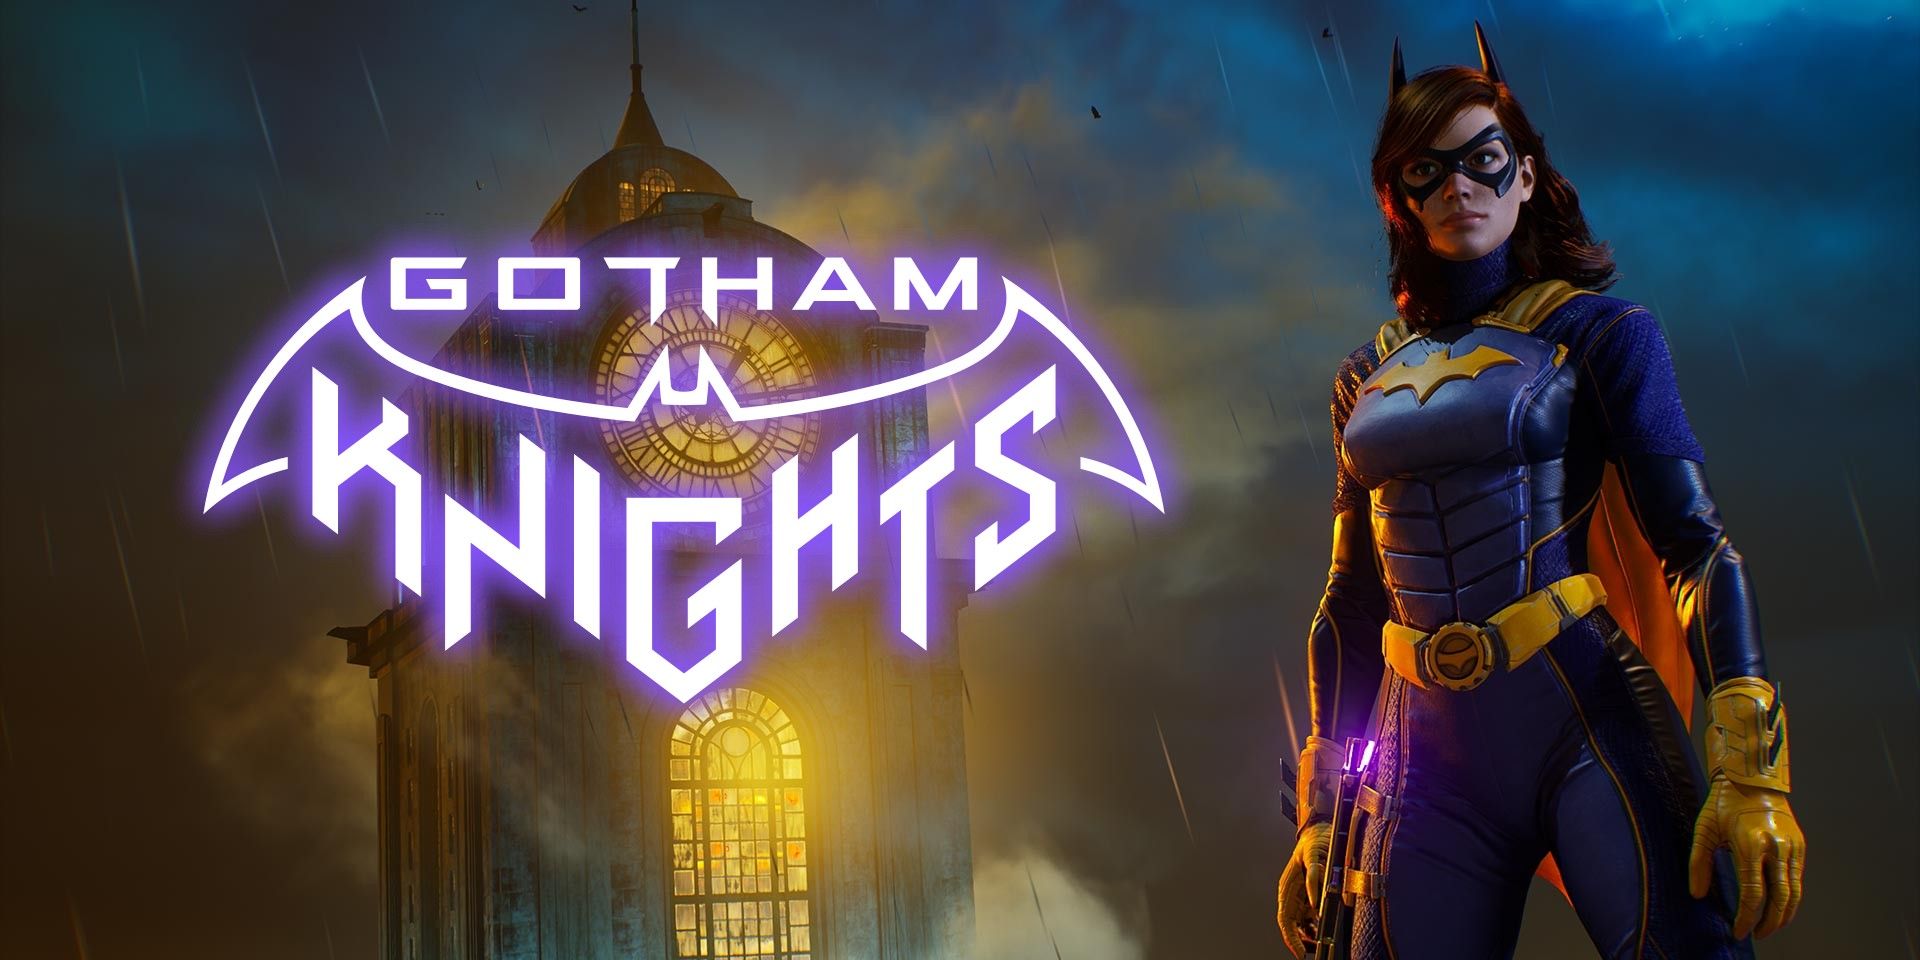 Gotham Knights on next-gen consoles only runs at 30 fps